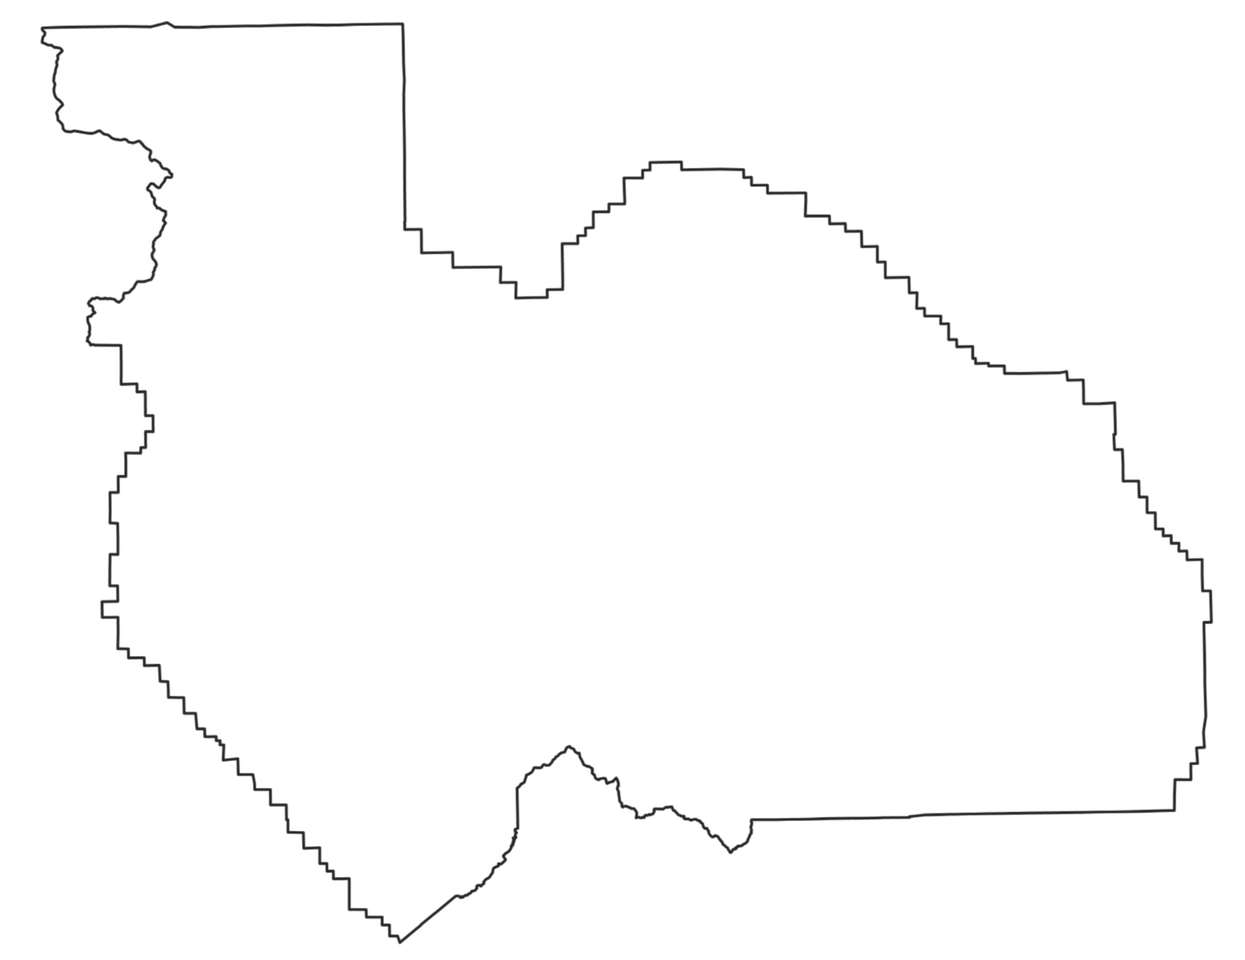 plumas county puzzle online from photo